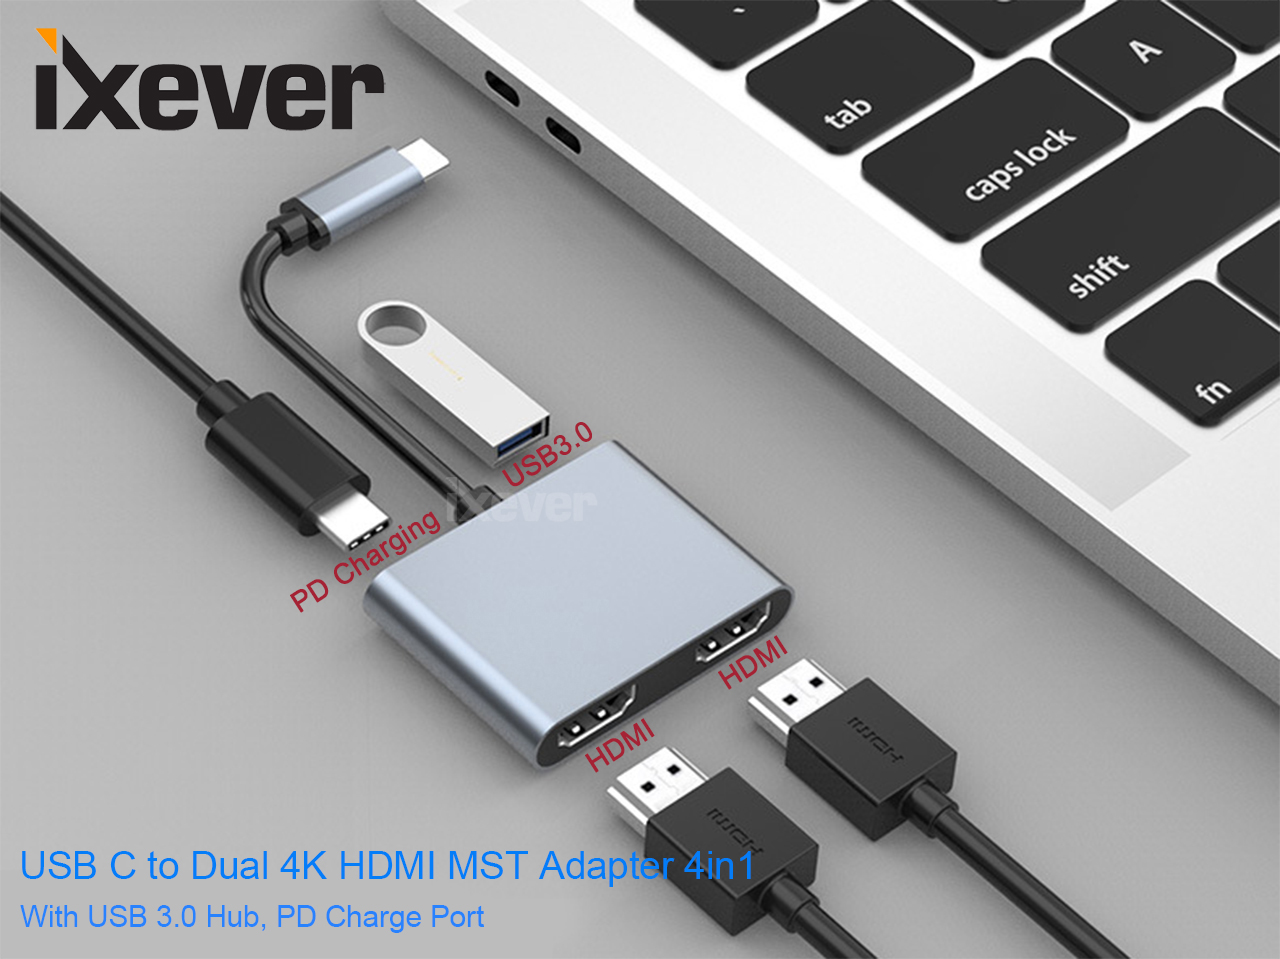 USB C to HDMI Adapter 4K, iXever USB Adapter Stream 4K HDMI [Thunderbolt 3  Compatible] for